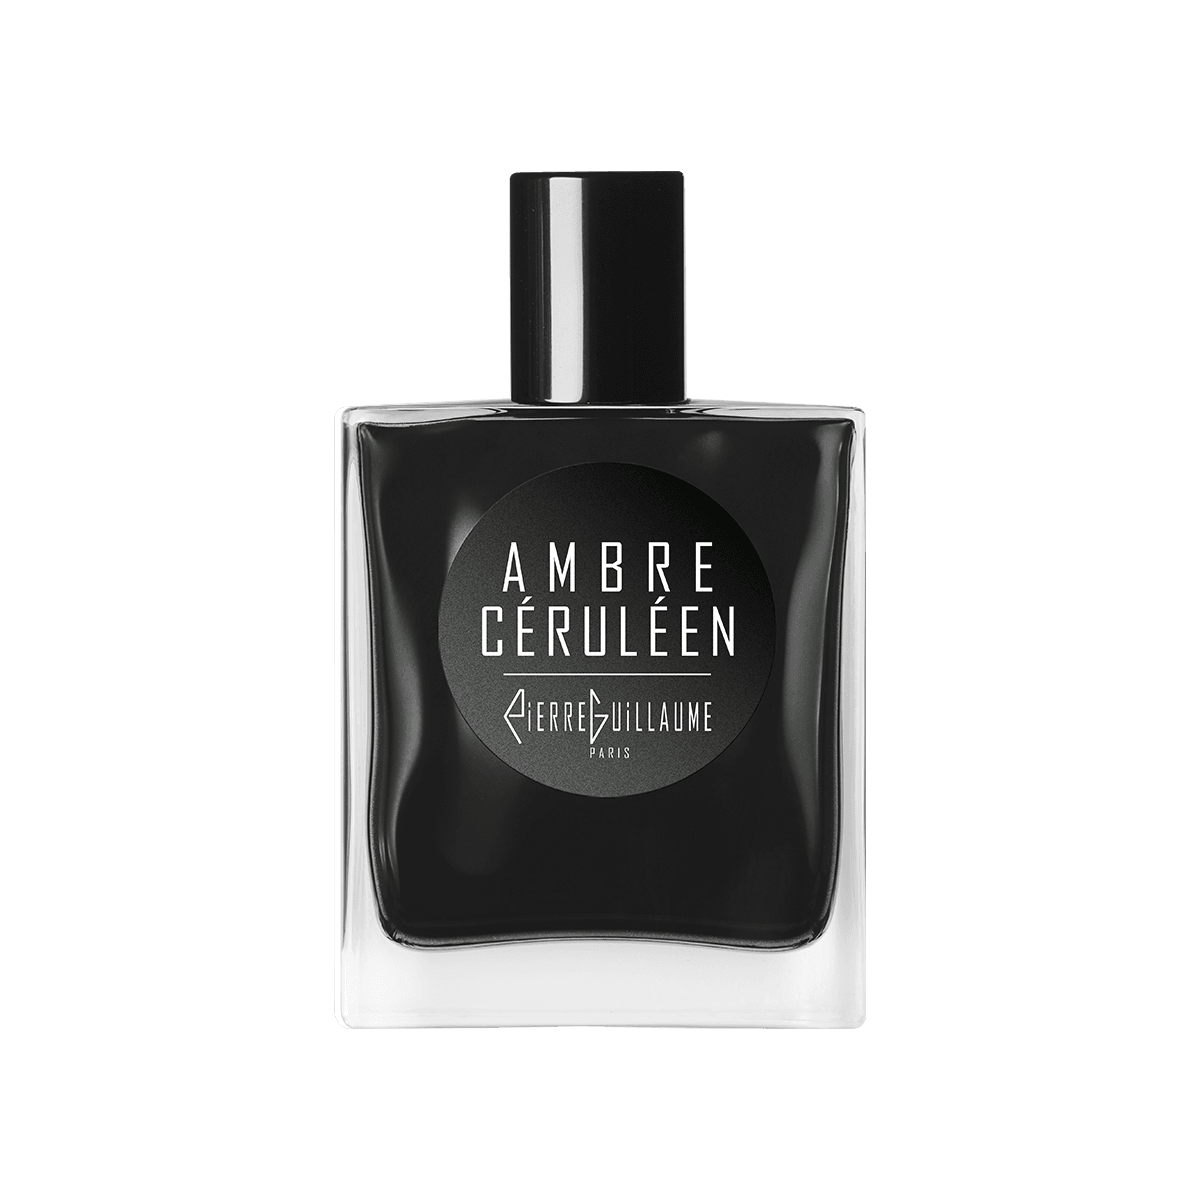 Pierre Guillaume - Ambre Ceruleen 50 ml | Perfume Lounge